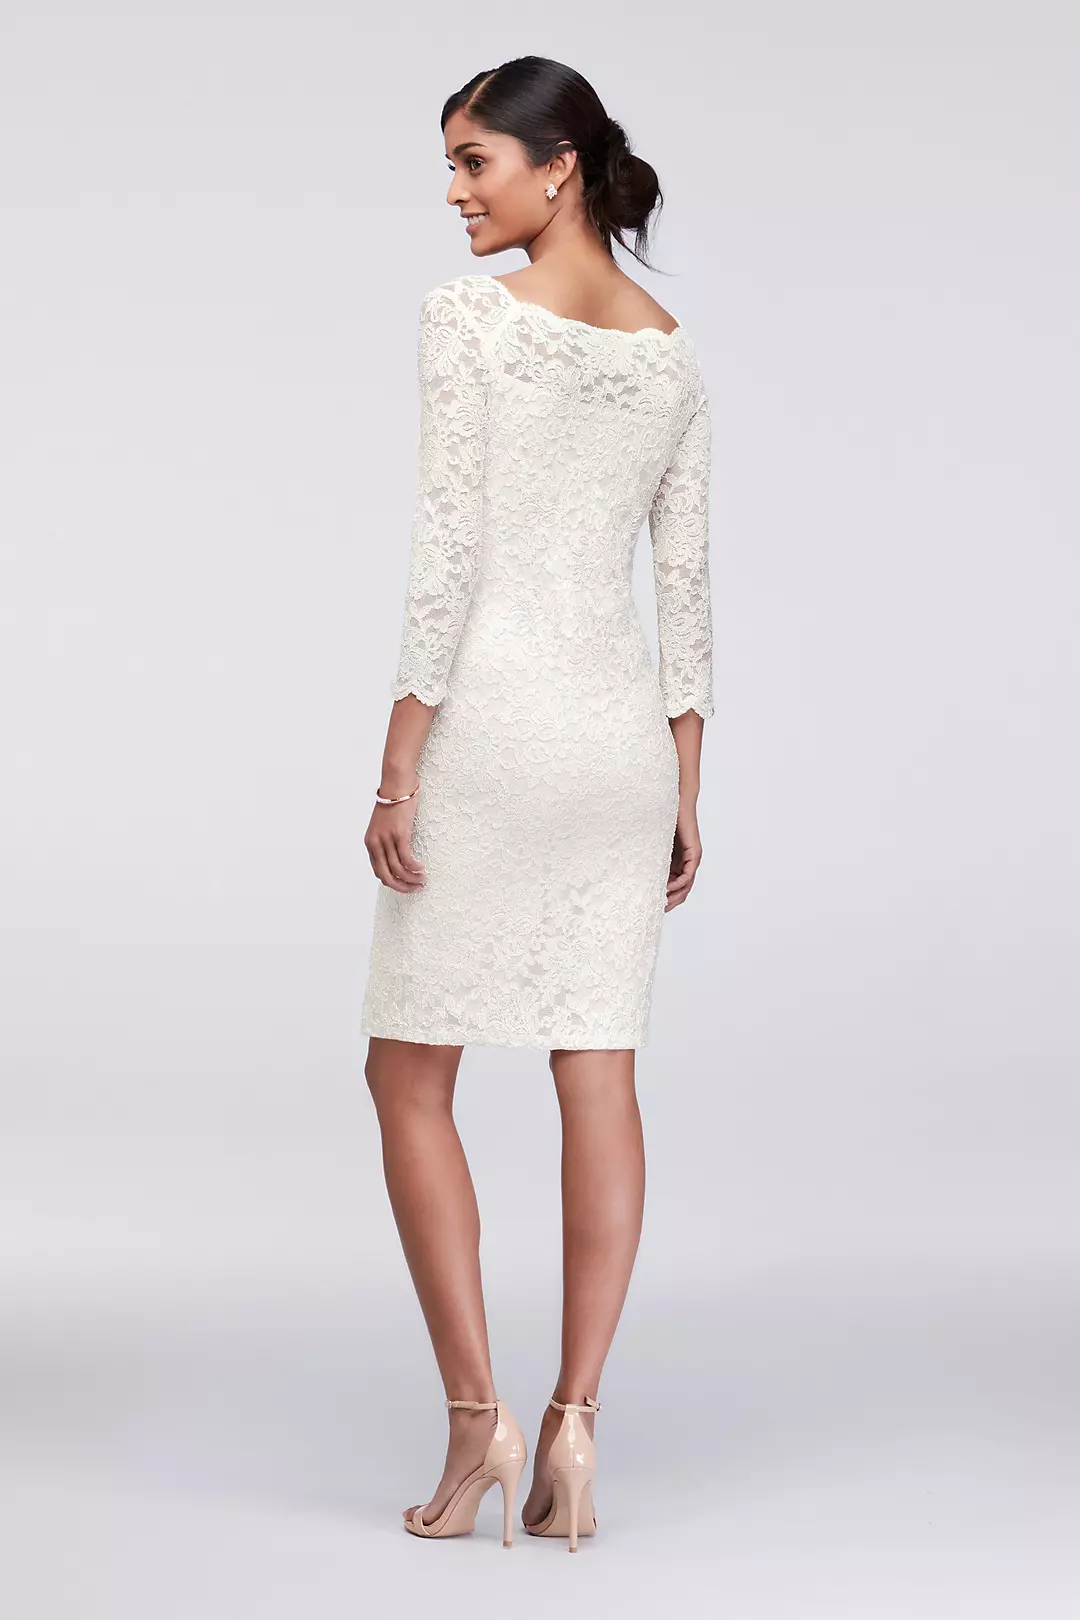 3/4-Sleeve Illusion Lace Cocktail Dress Image 2